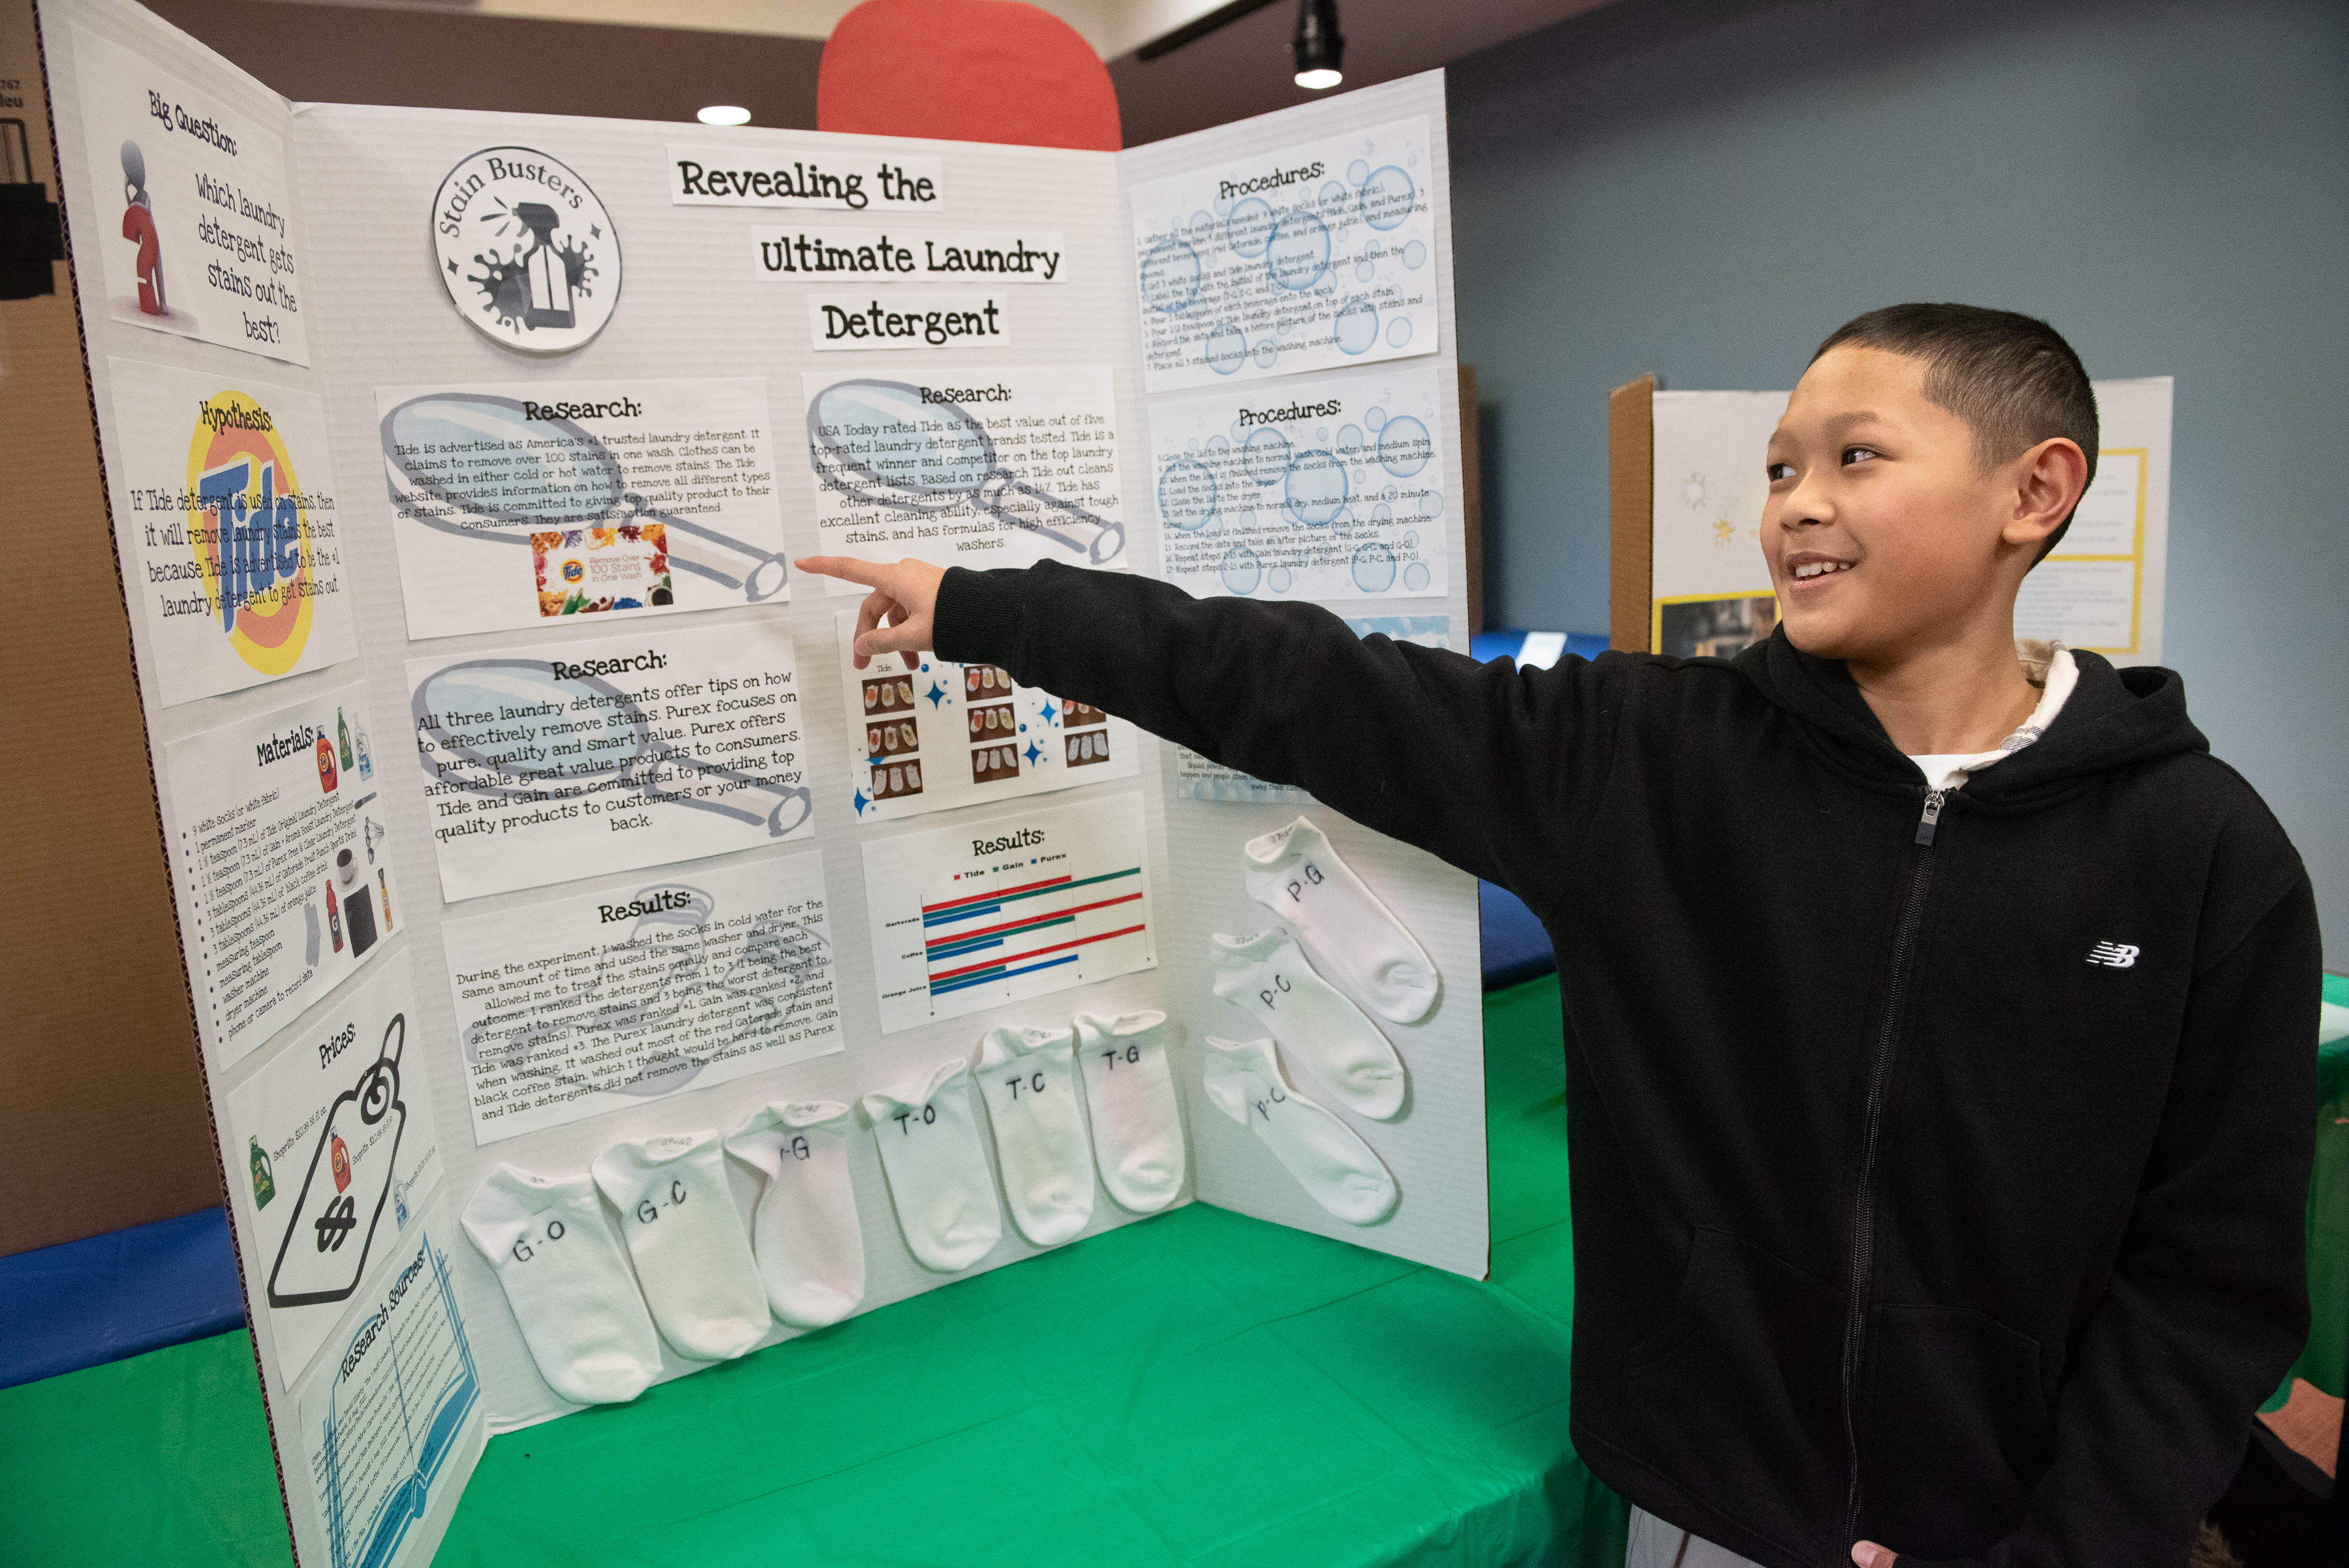 Which Detergent Removes Stains the Best Science Fair Project: Ultimate Cleaning Results